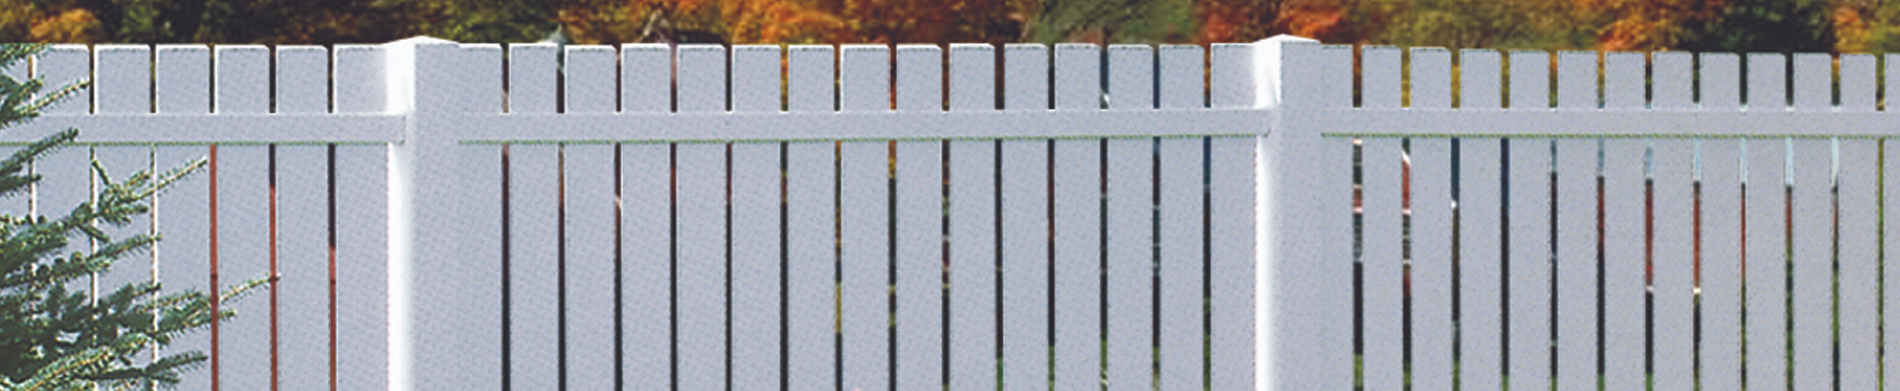 Installing a Vinyl Picket Fence for decorative purpose – Duramax offering colored fences that can last for a lifetime